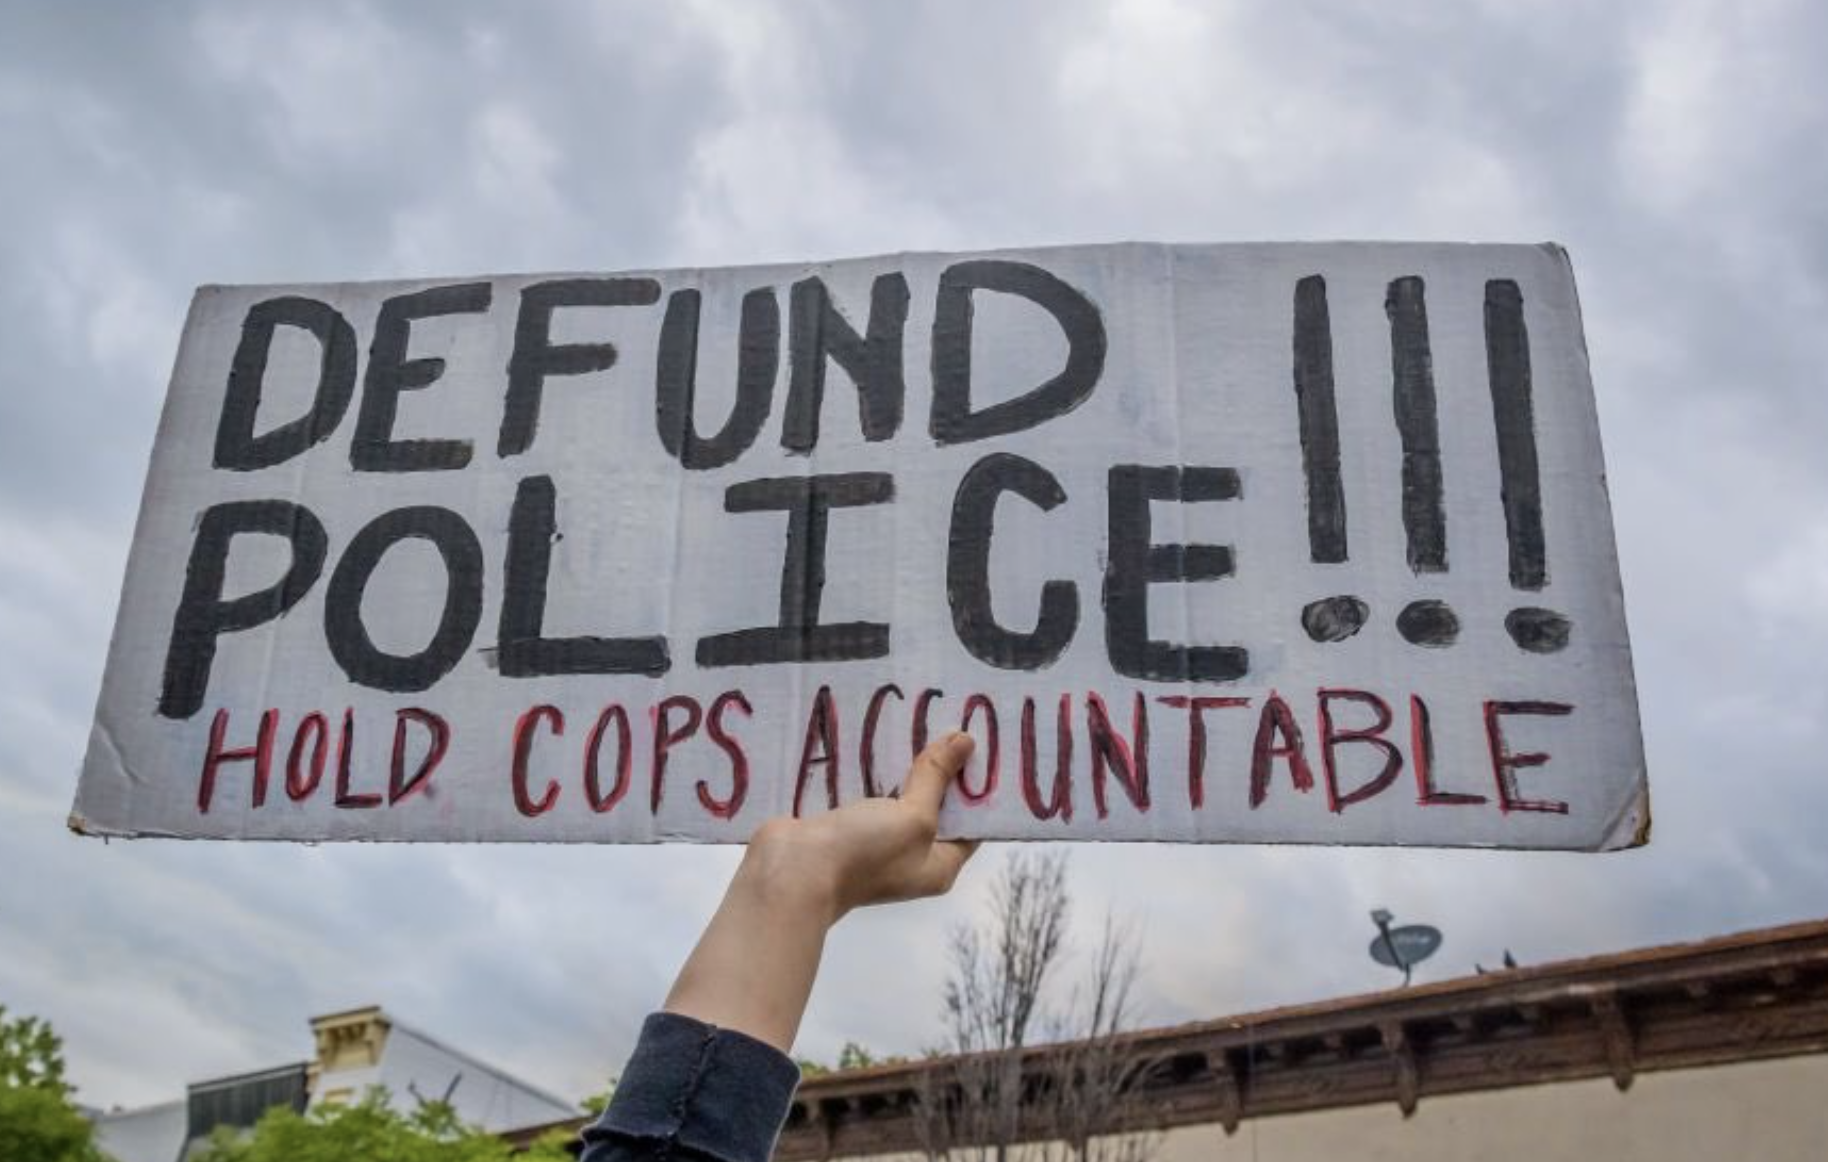 What Does Defund The Police Mean?